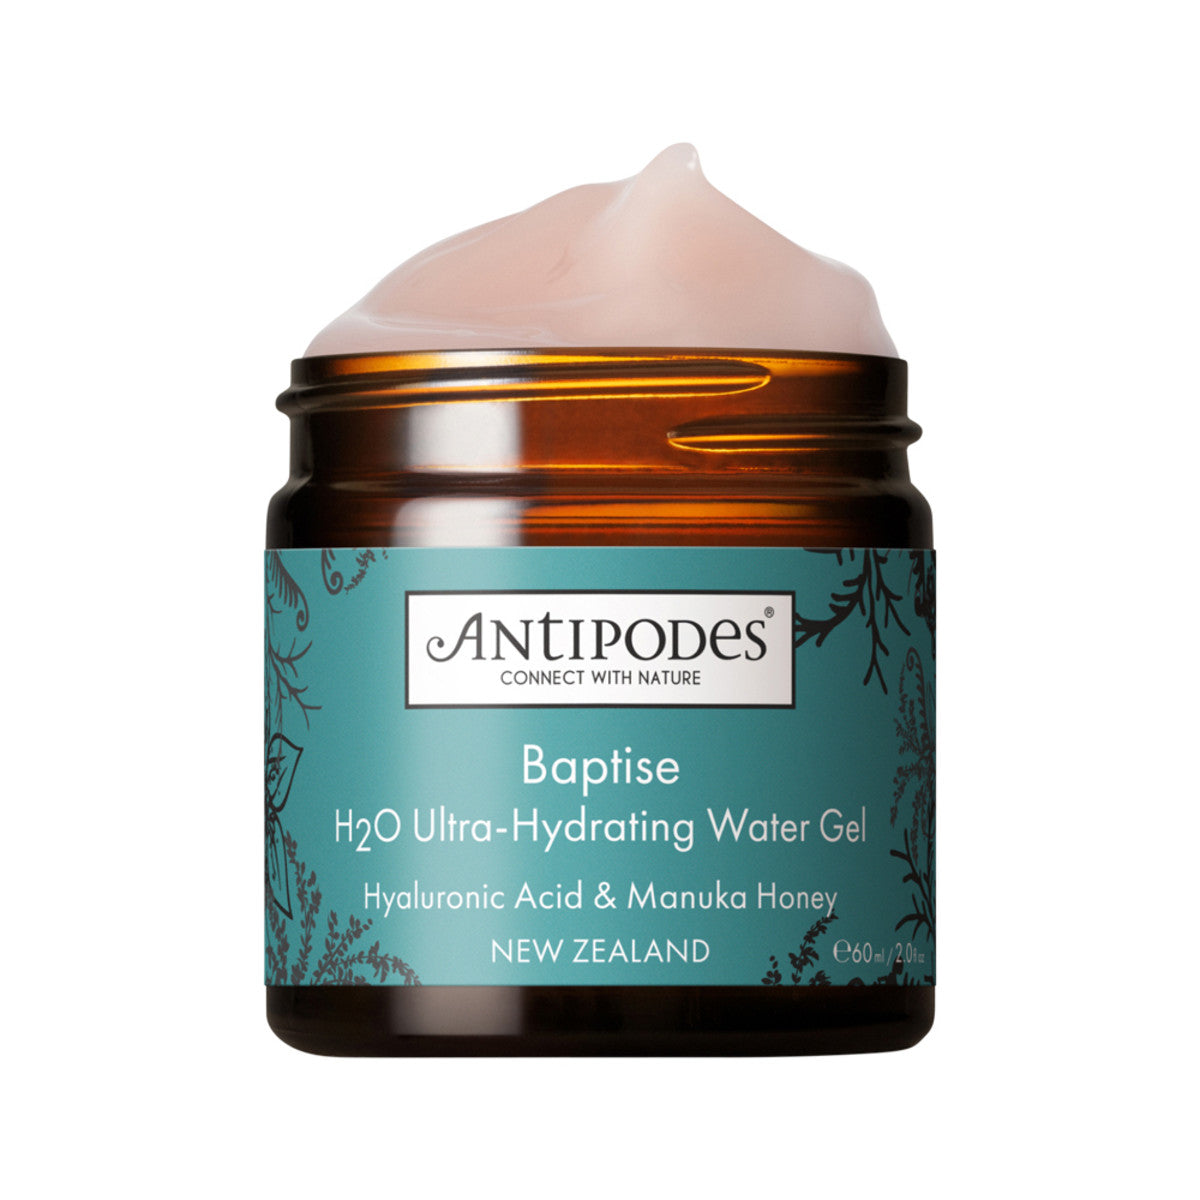 Antipodes Baptise H₂O Ultra-Hydrating Water Gel 60ml-The Living Co.